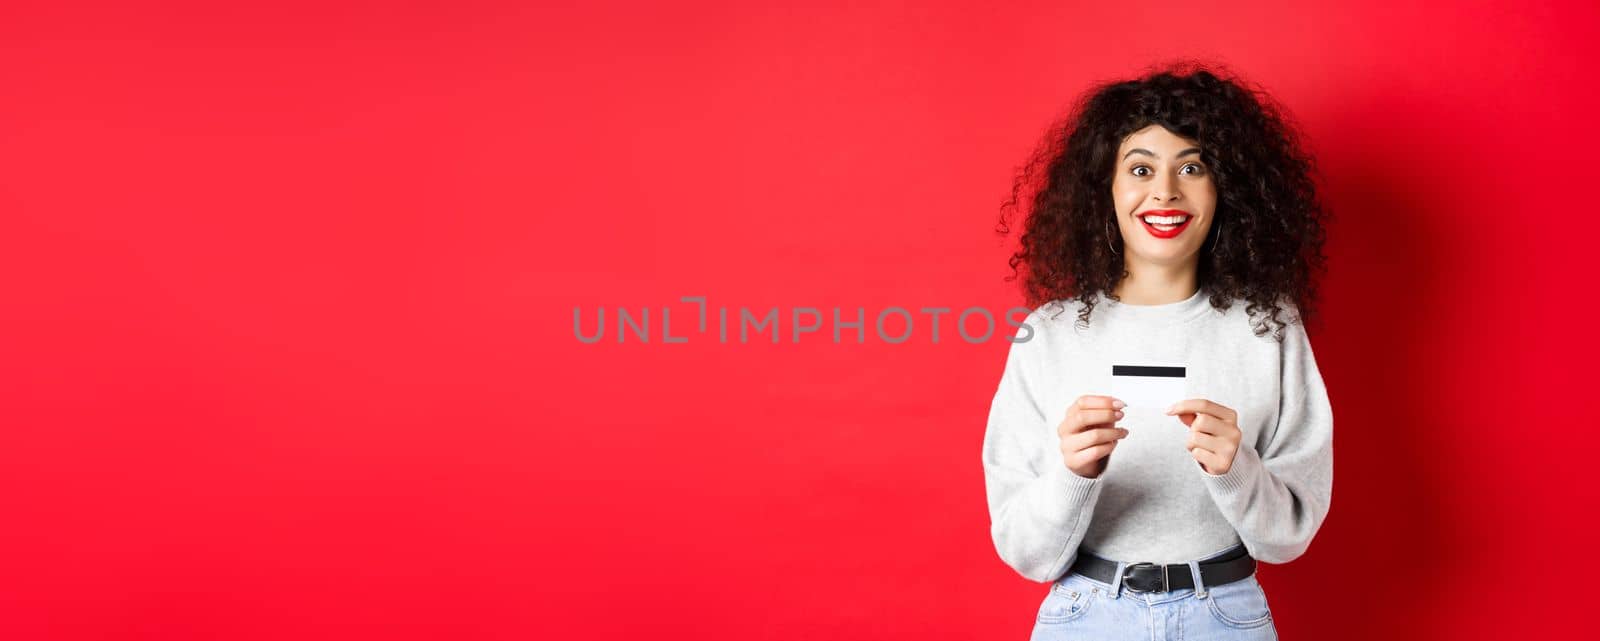 Excited smiling woman showing plastic credit card, standing in casual clothes on red background.